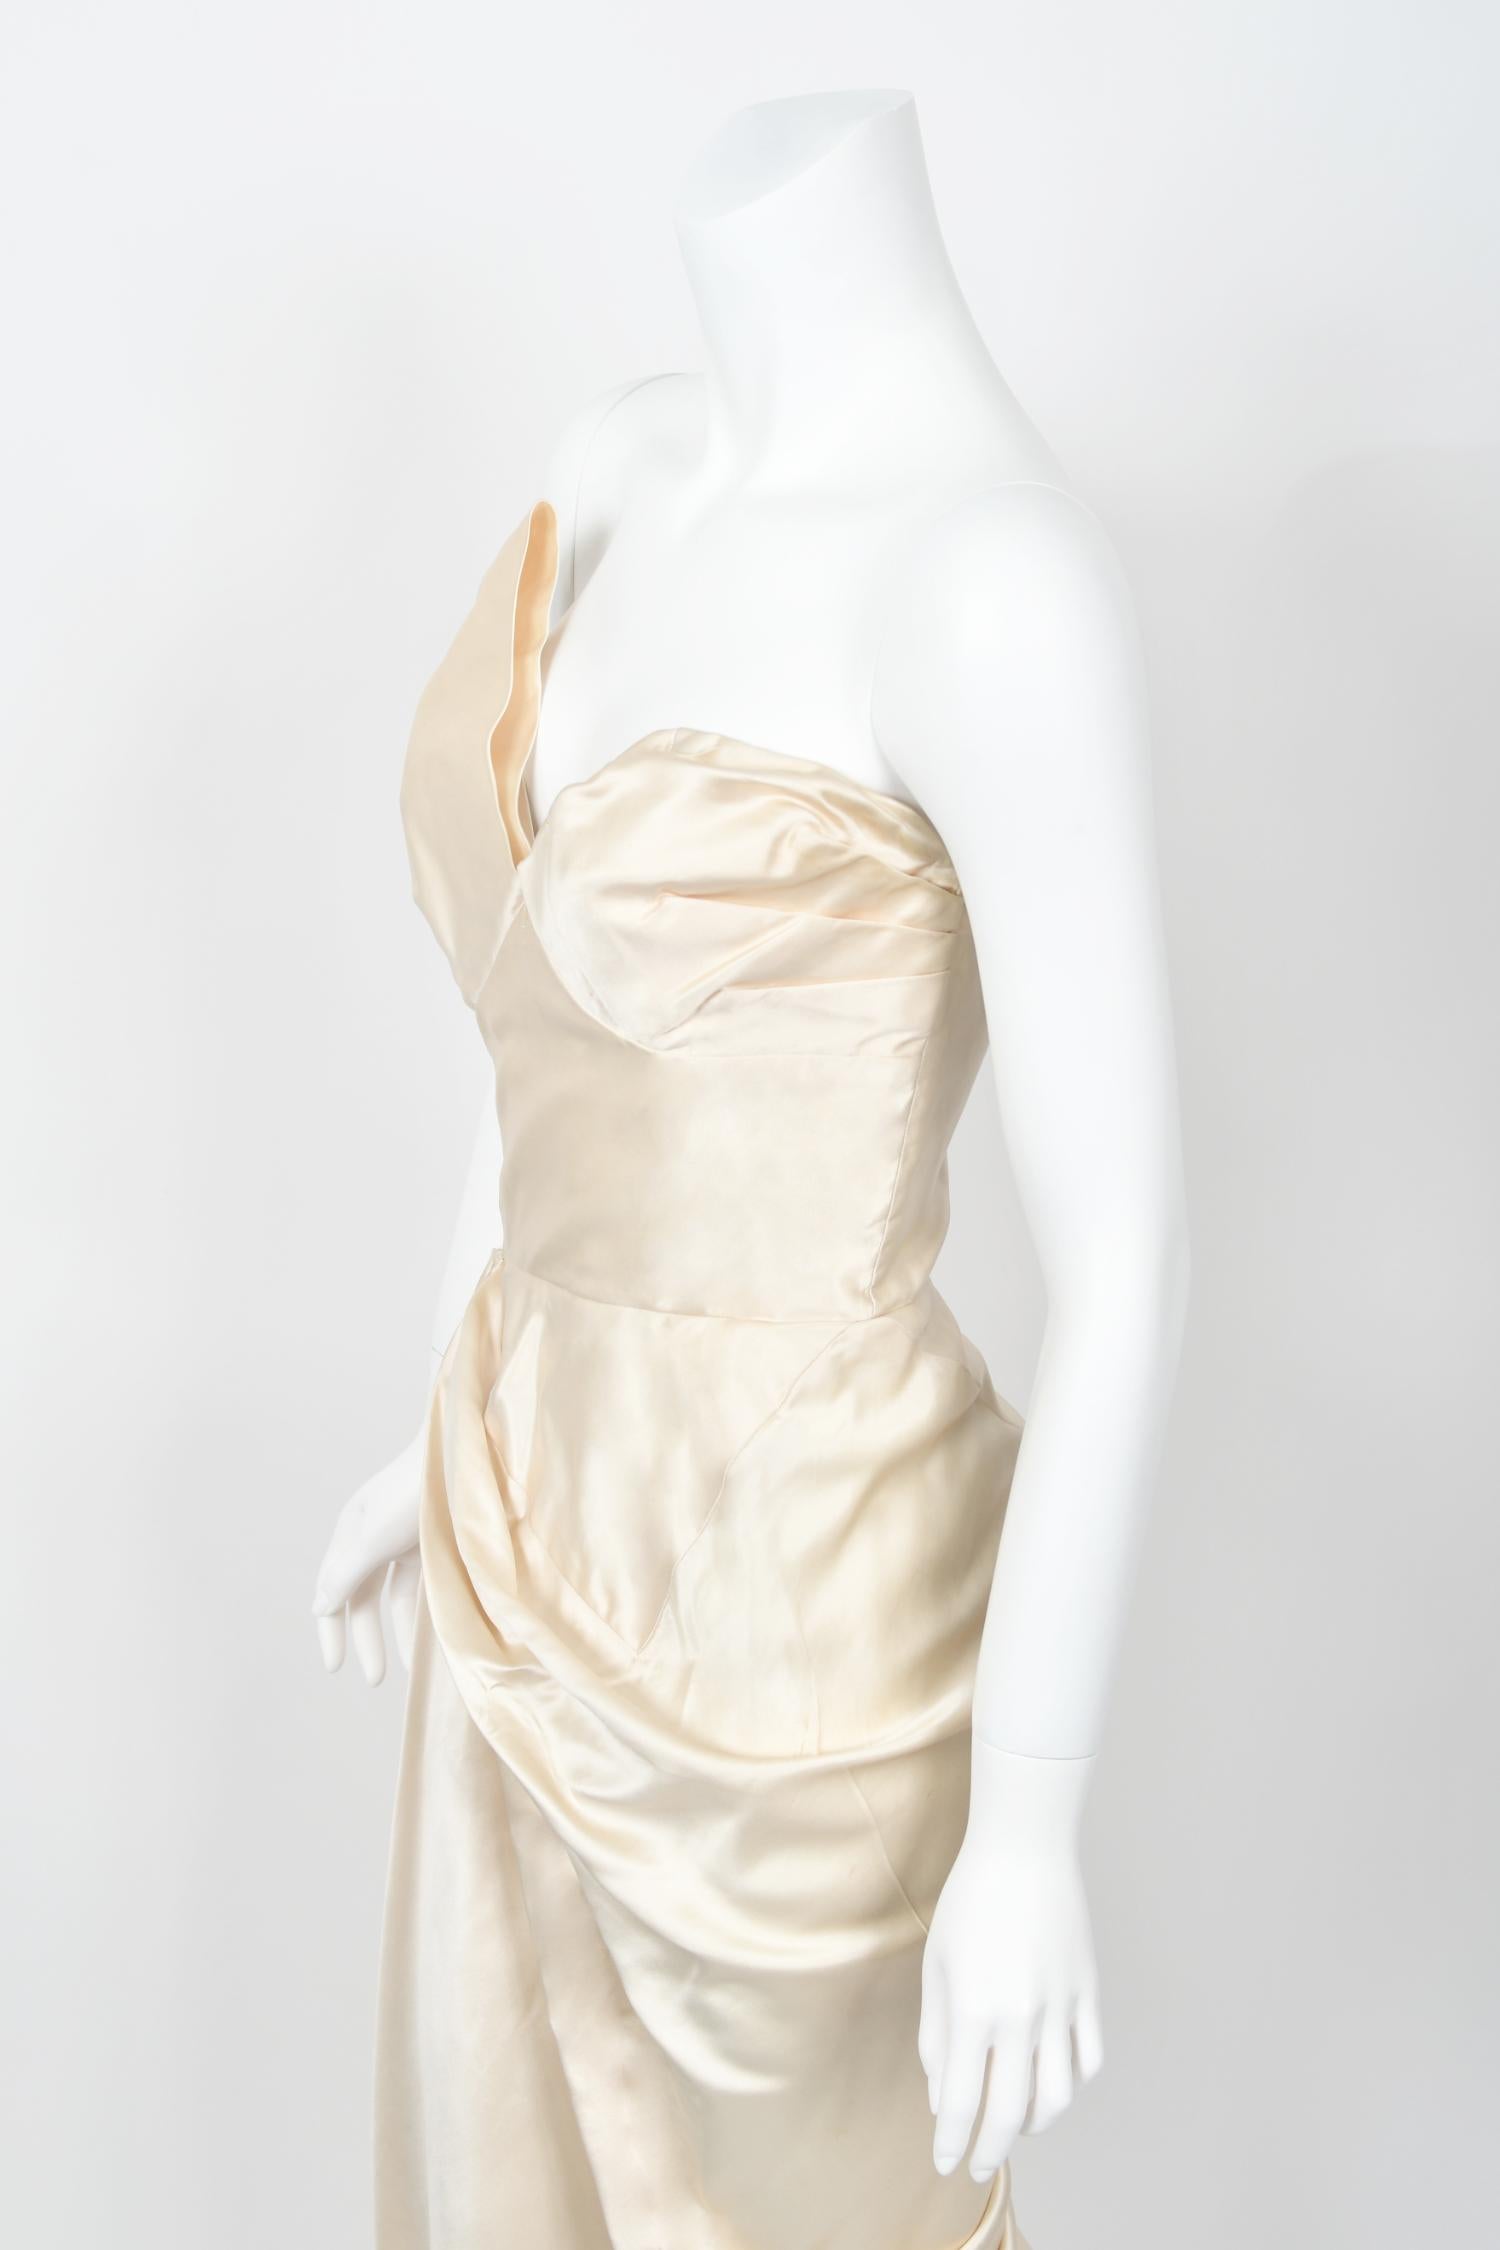 1949 Jeanne Lanvin Haute Couture Ivory Silk Satin Strapless Draped Bridal Gown  For Sale 8